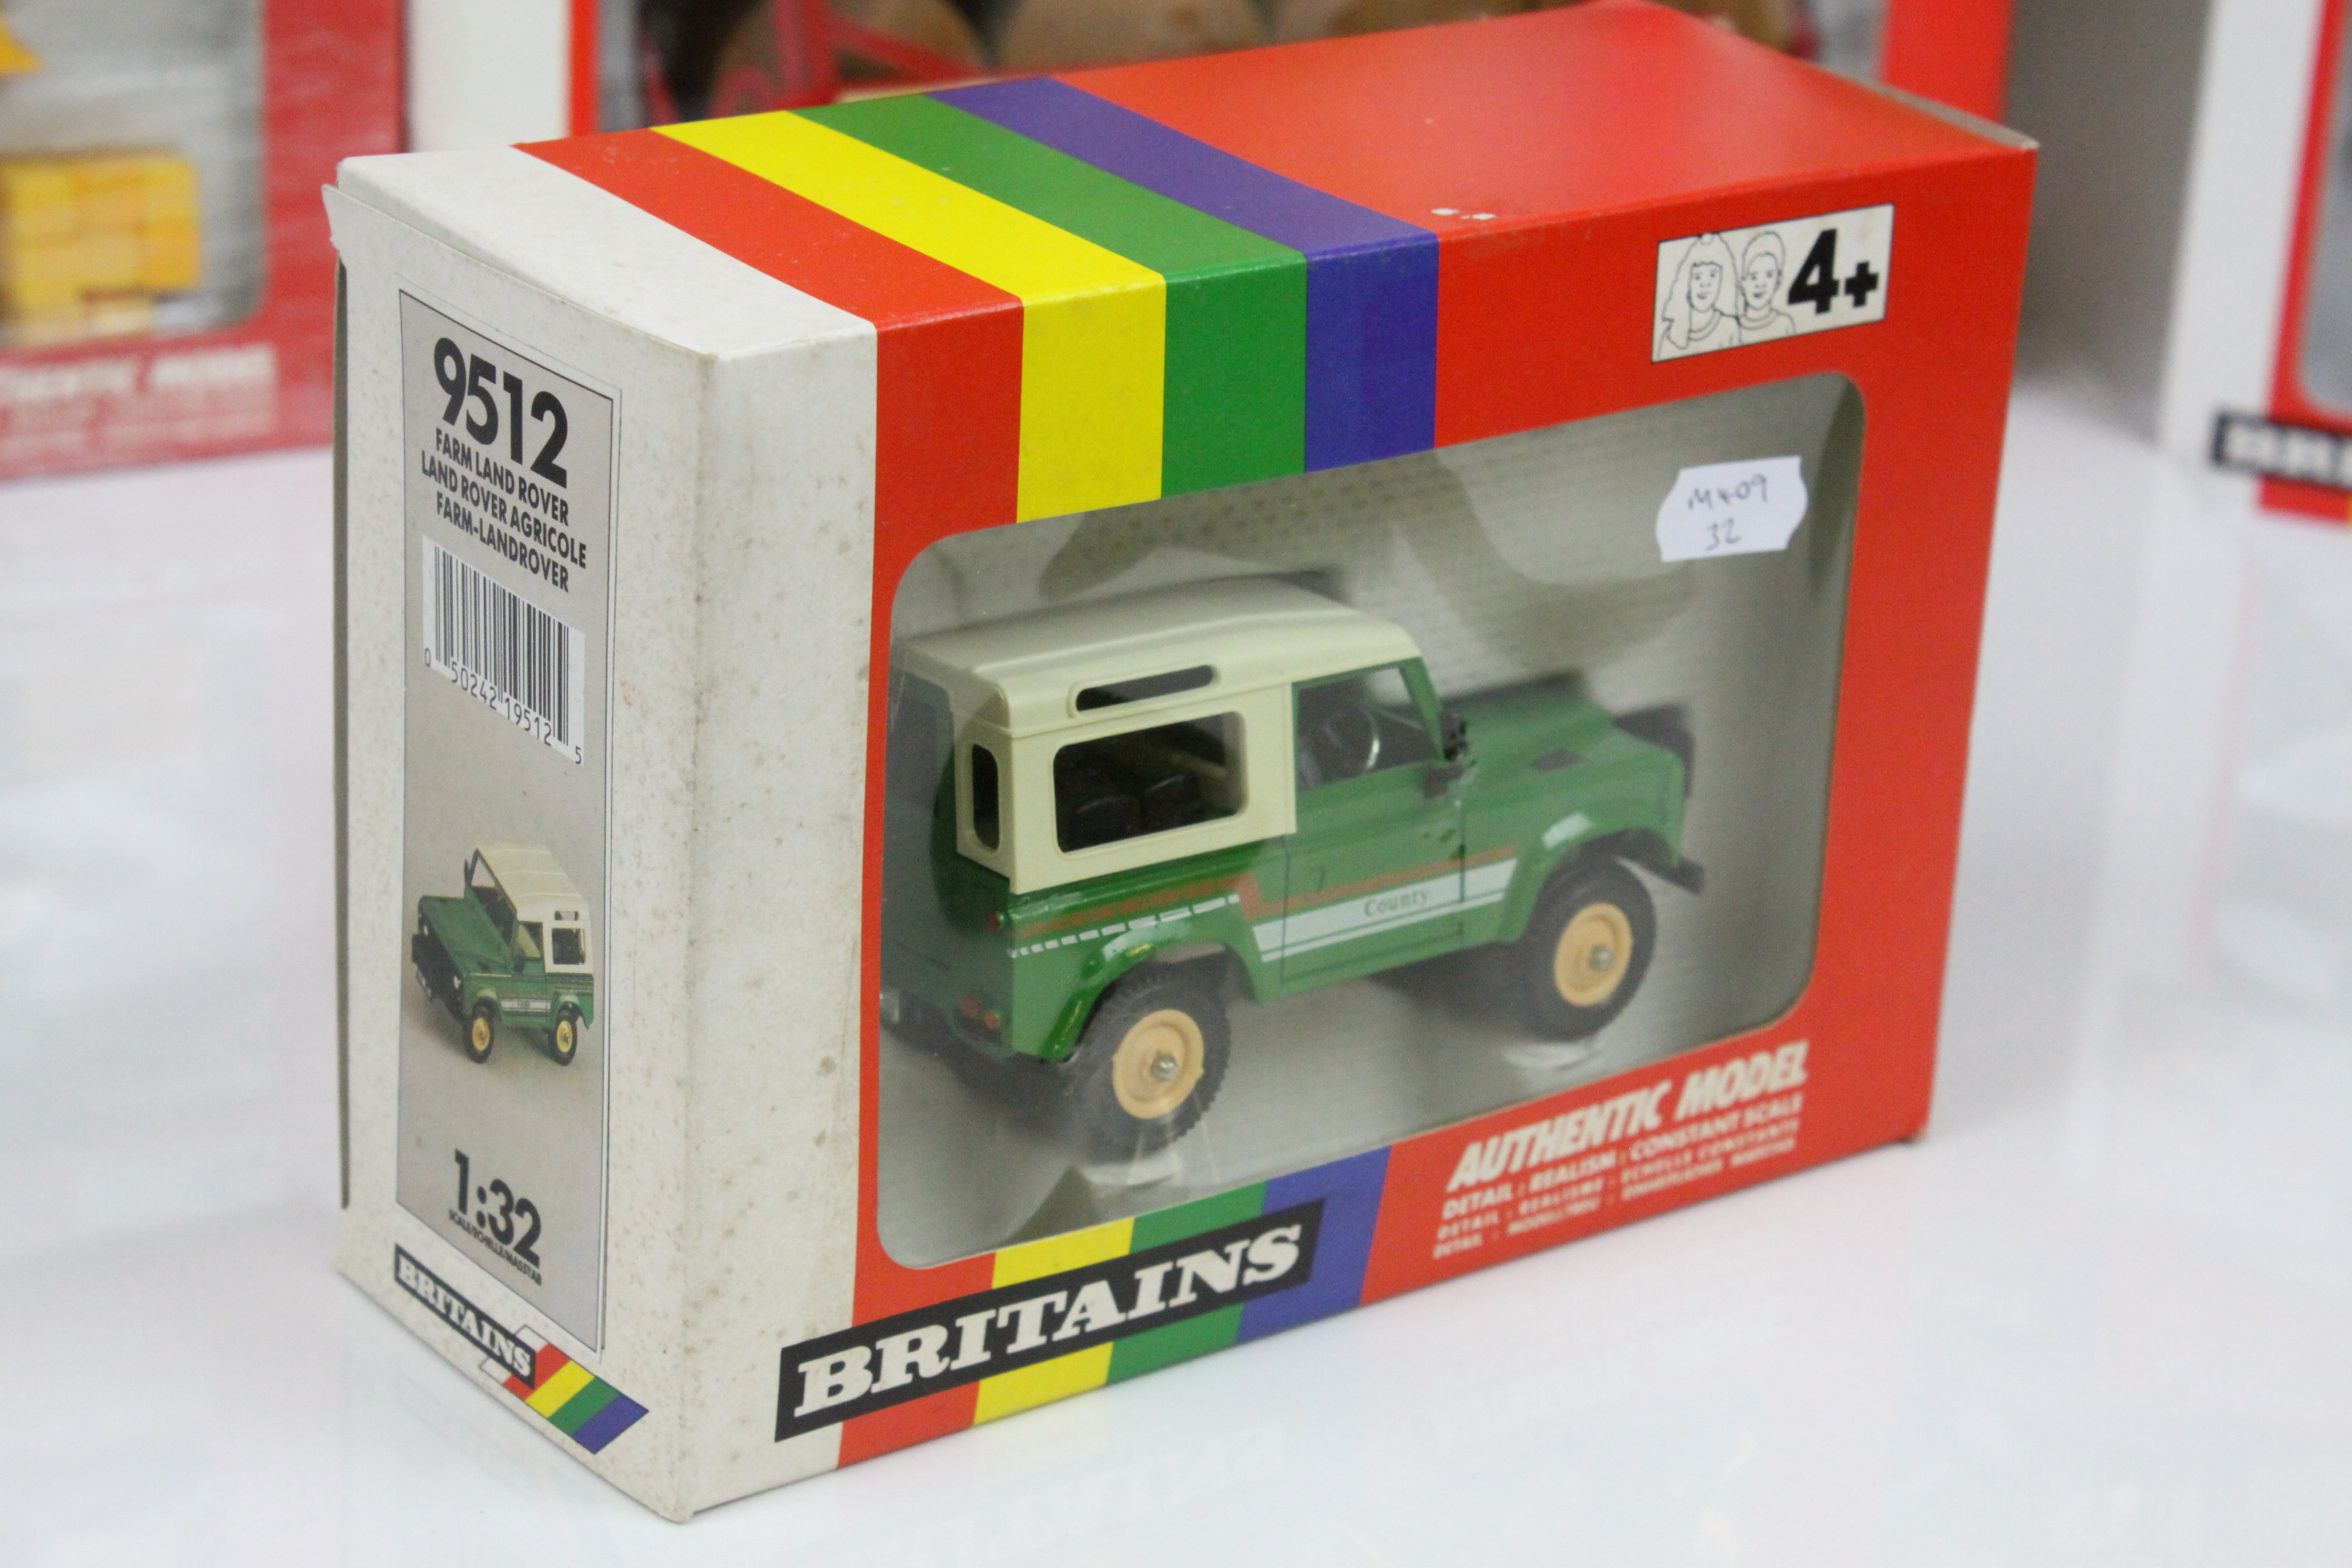 16 Boxed 1:32 Britains farming models to include 9566, 9559, 9539, 9548, 9547, 9574, 9509, 9519, - Image 6 of 27